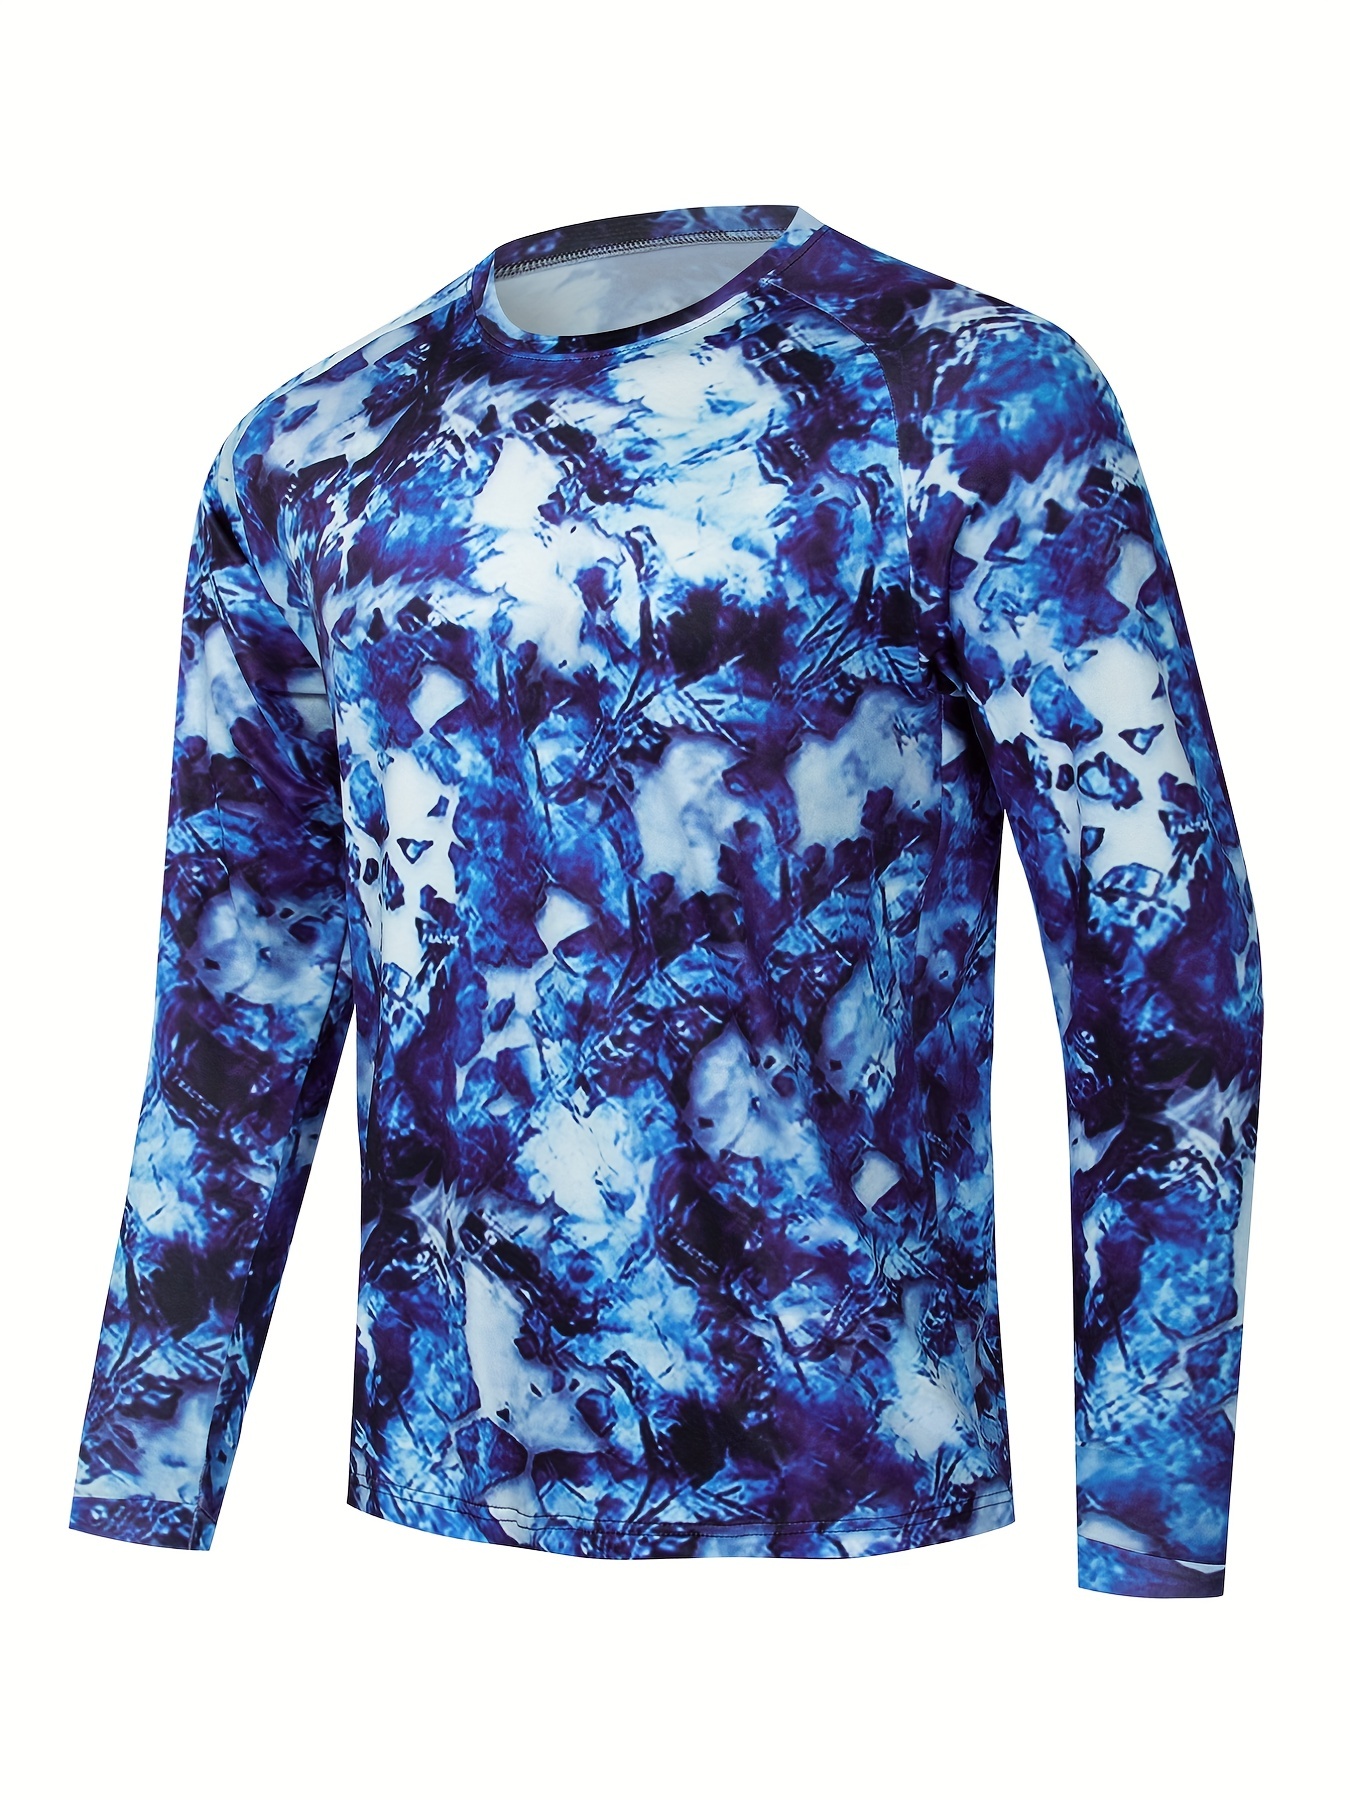 Huk Sports & Outdoors Apparel Items for Men